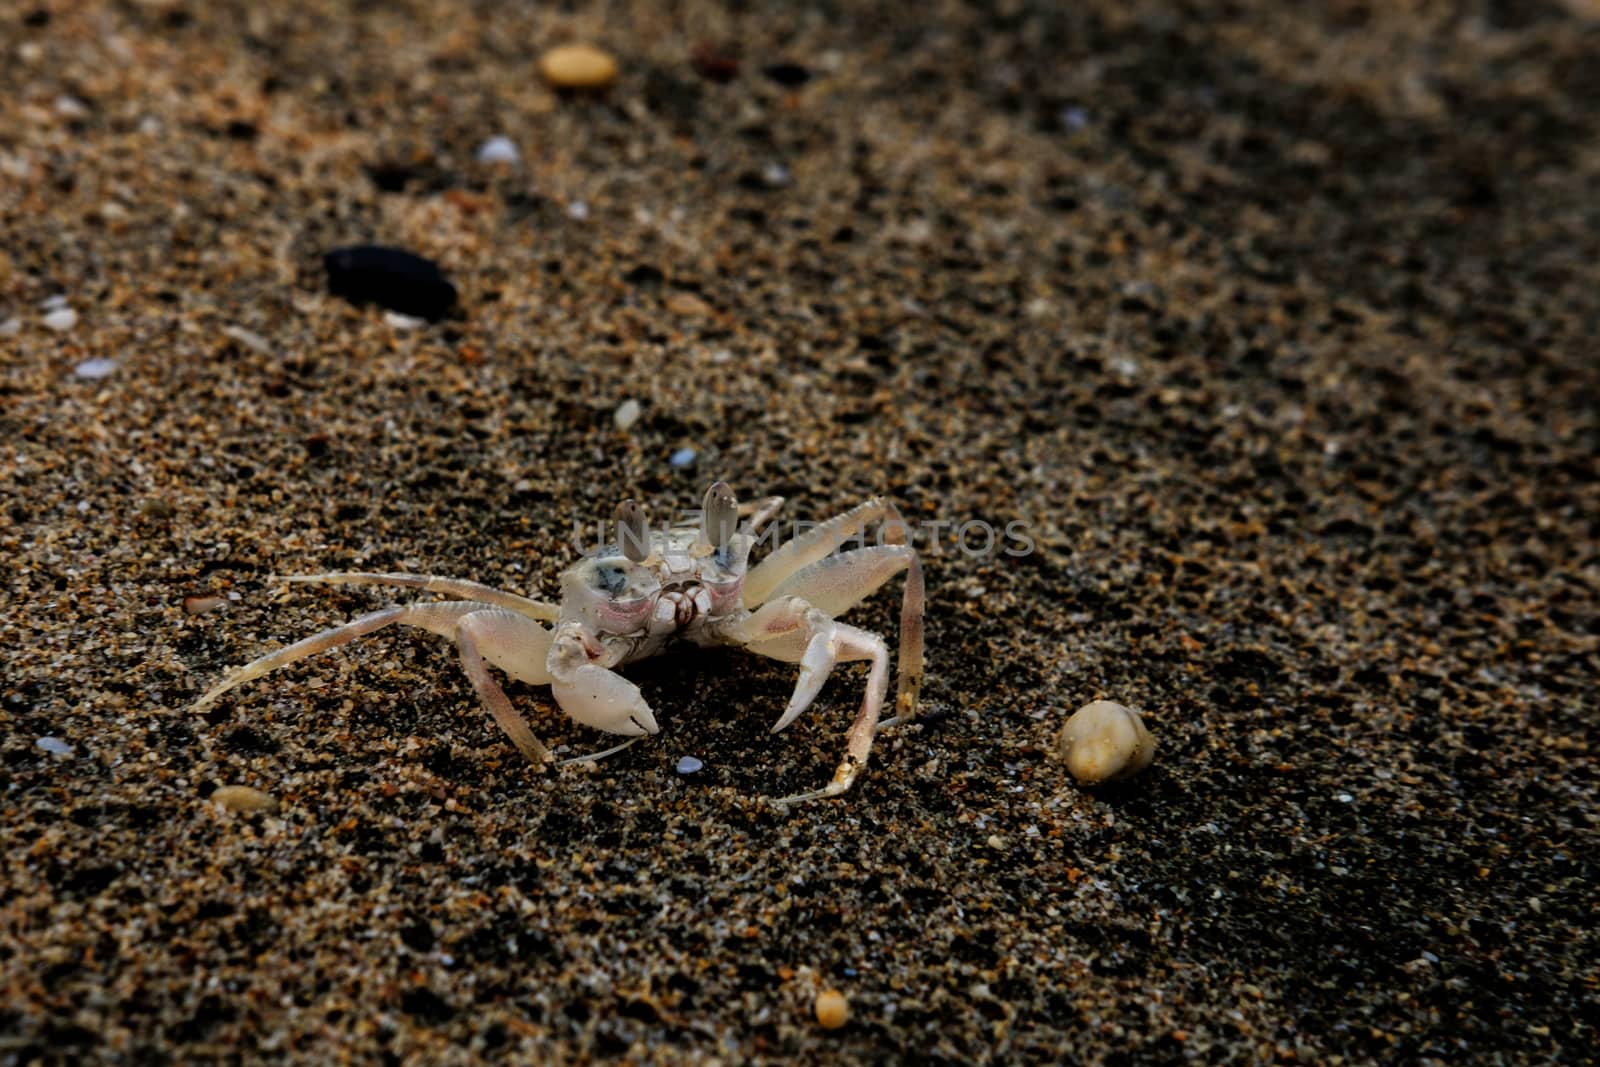 Ghost crab in the sand by rainfallsup